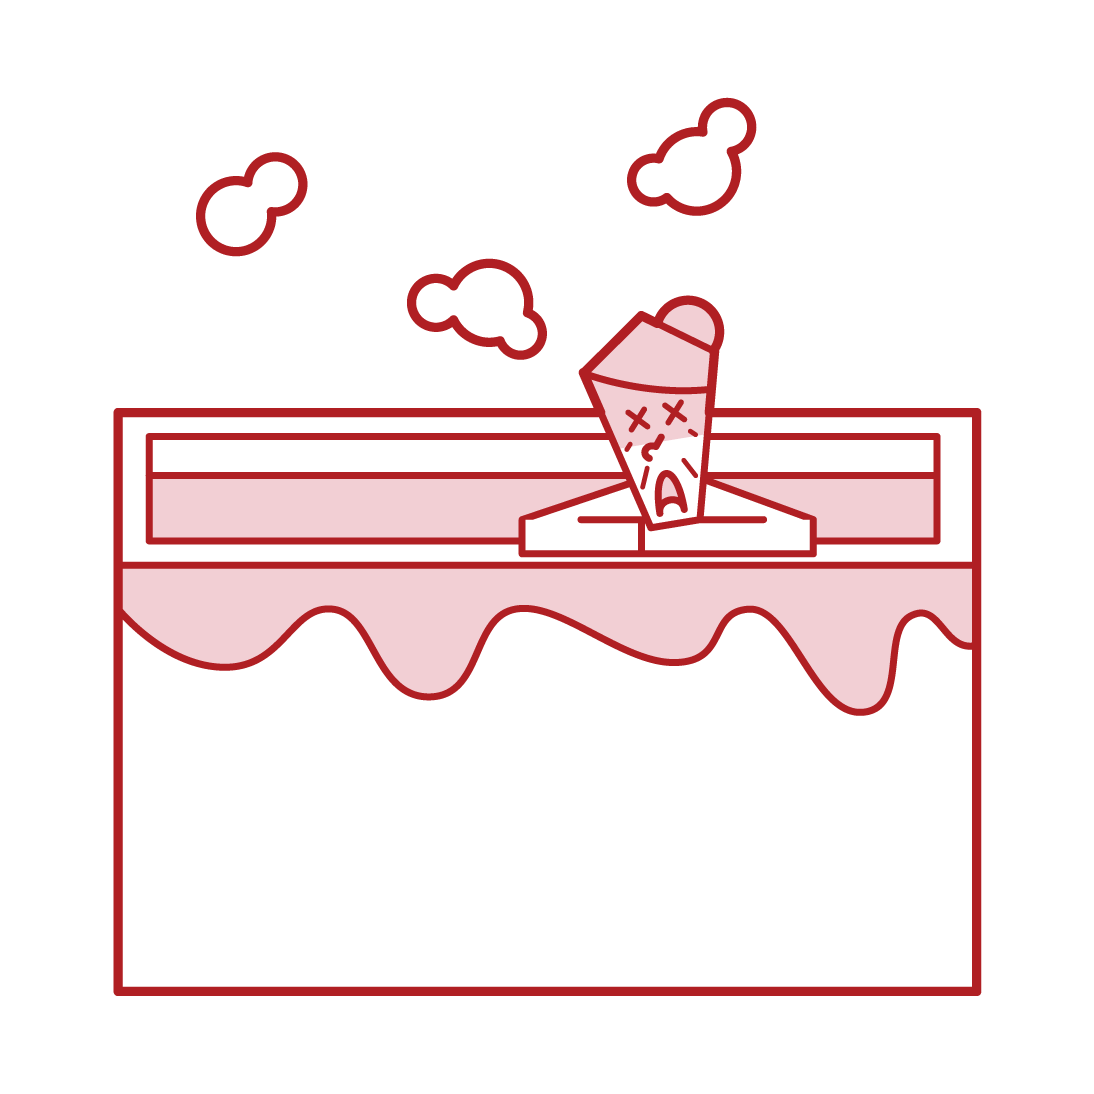 Illustration of a person (grandmother) who can blur in the bath